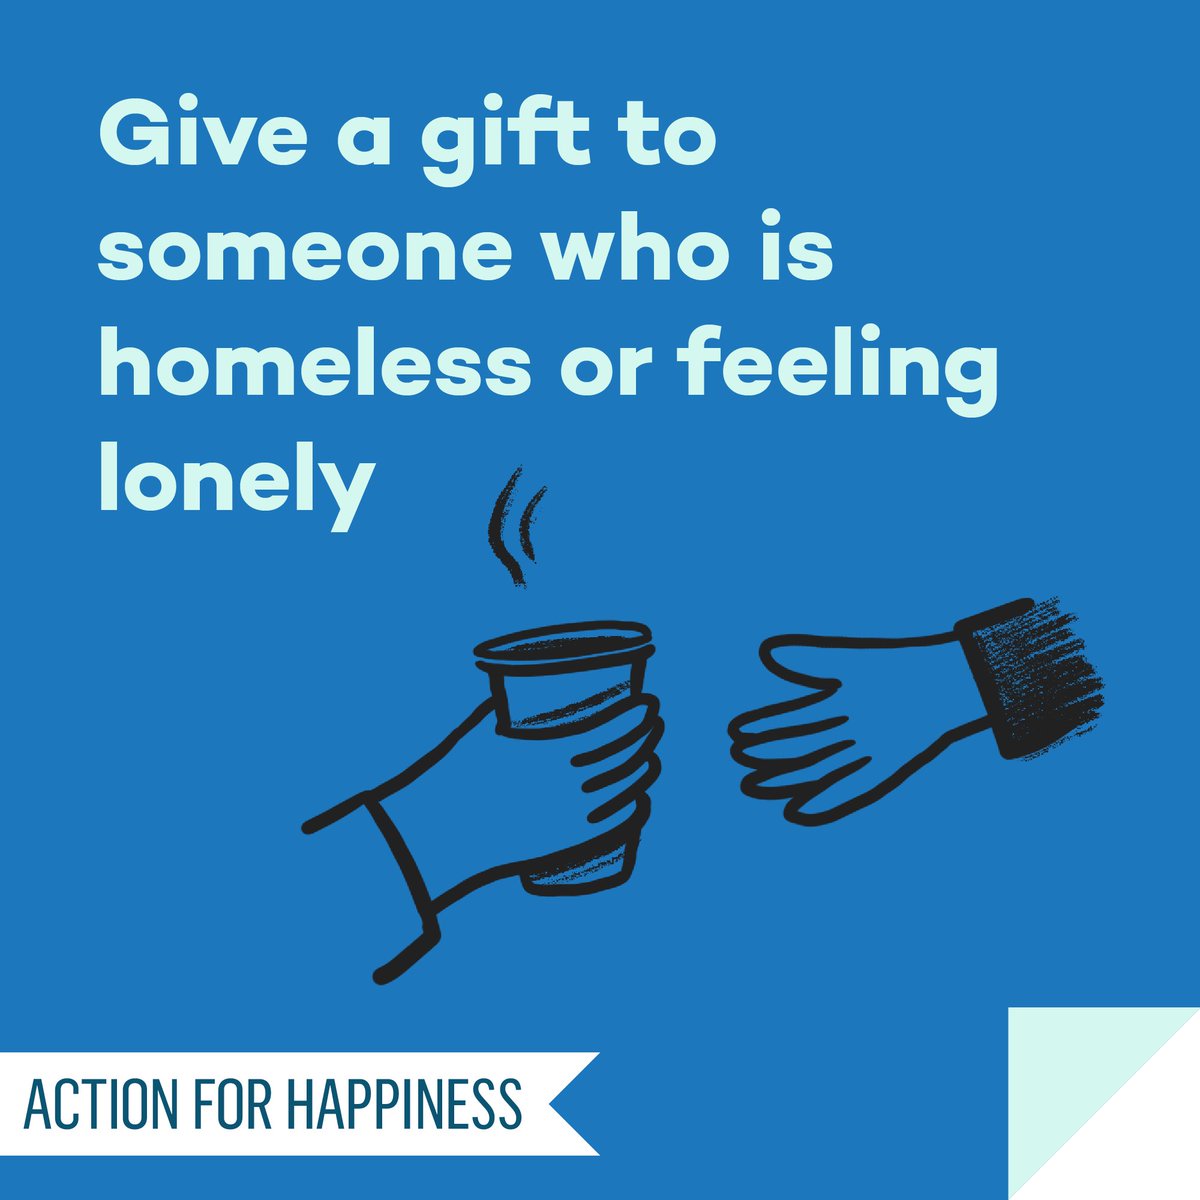 Do Good December - Day 5: Give a gift to someone who is homeless or feeling lonely actionforhappiness.org/do-good-decemb… #DoGoodDecember